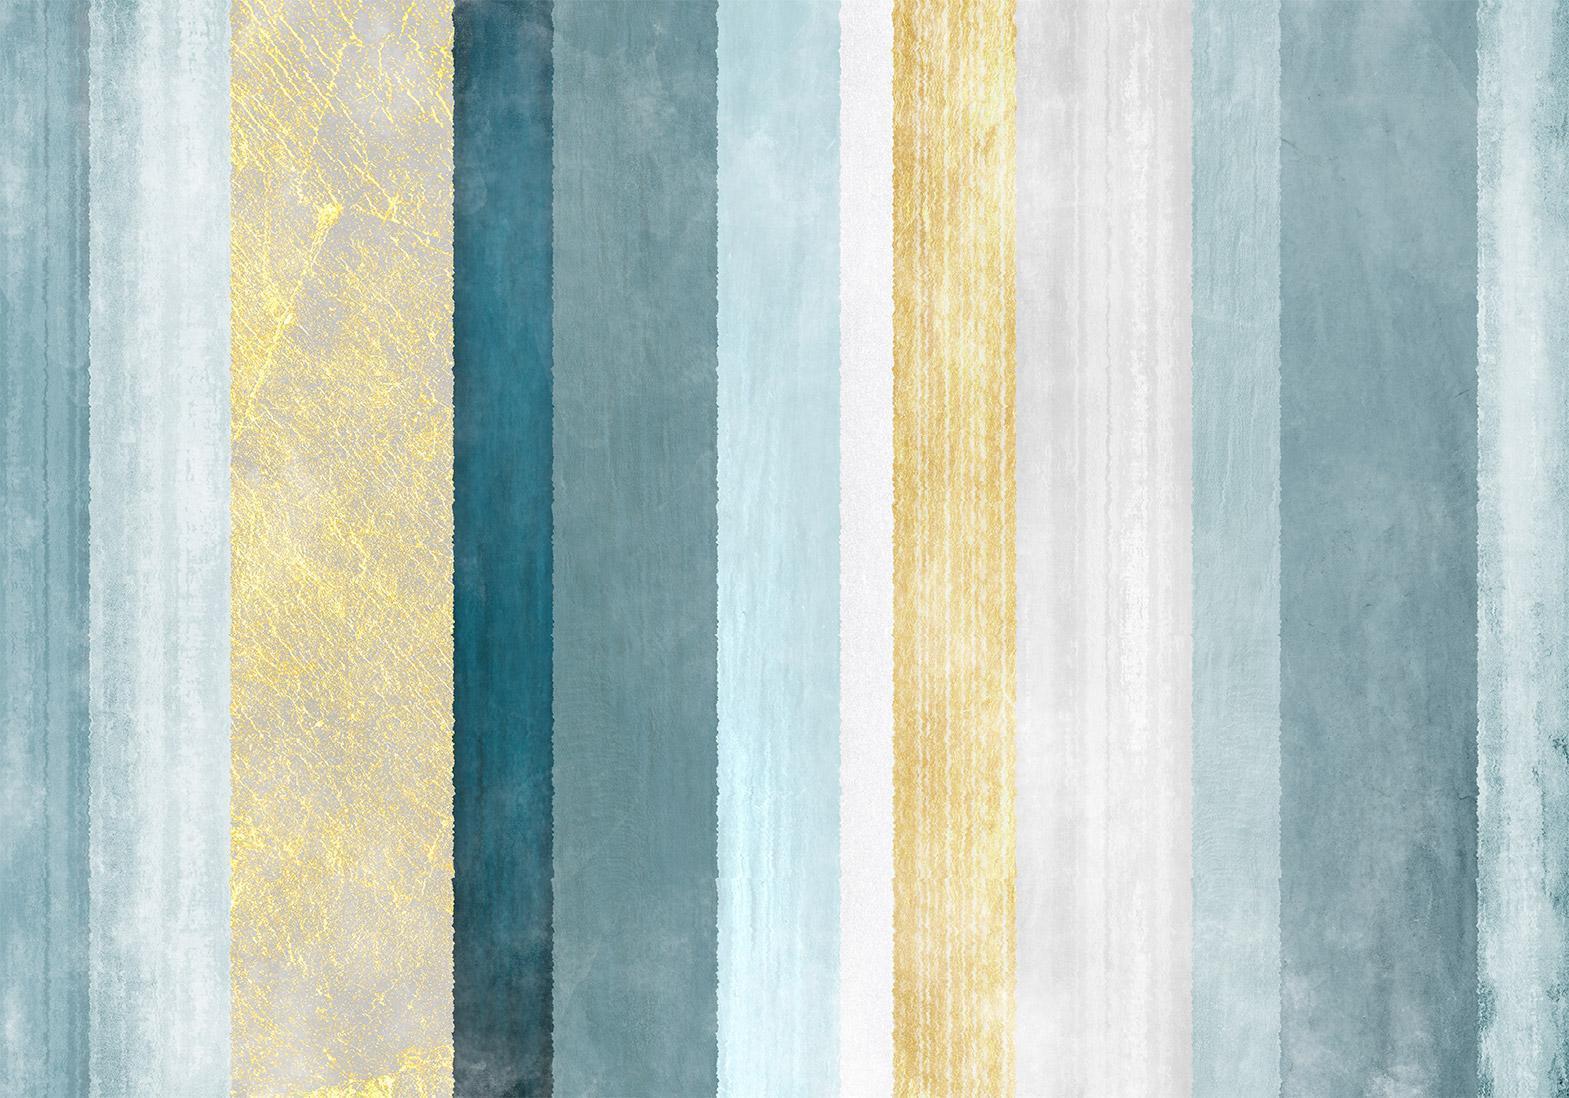 Papier peint - Striped pattern - abstract background in stripes in blue tones with gold pattern